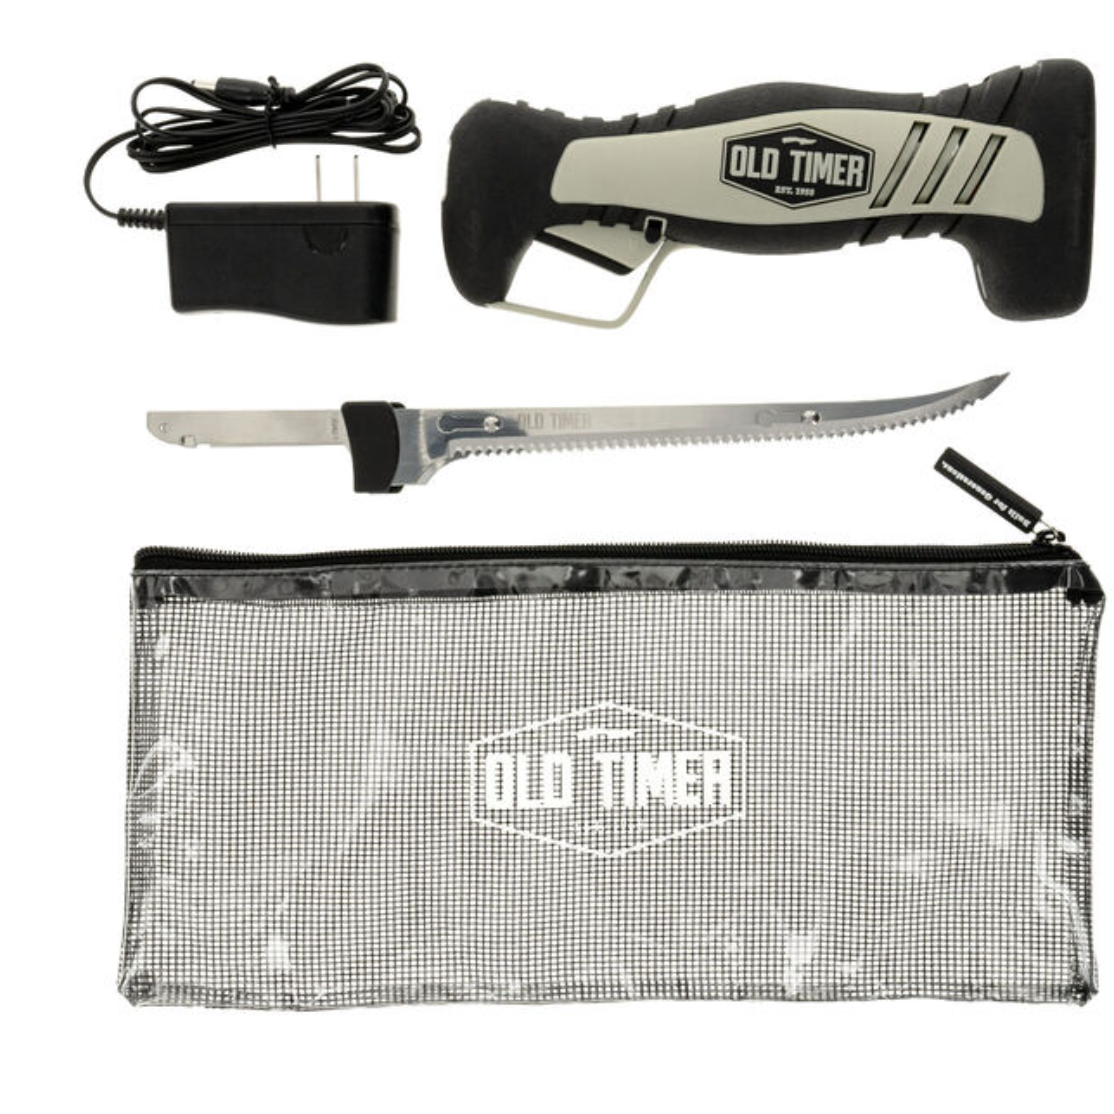 BUBBA BLADE ELECTRIC FILLET KNIFE LITHIUM ION BATTERY,-2 4 BLADE